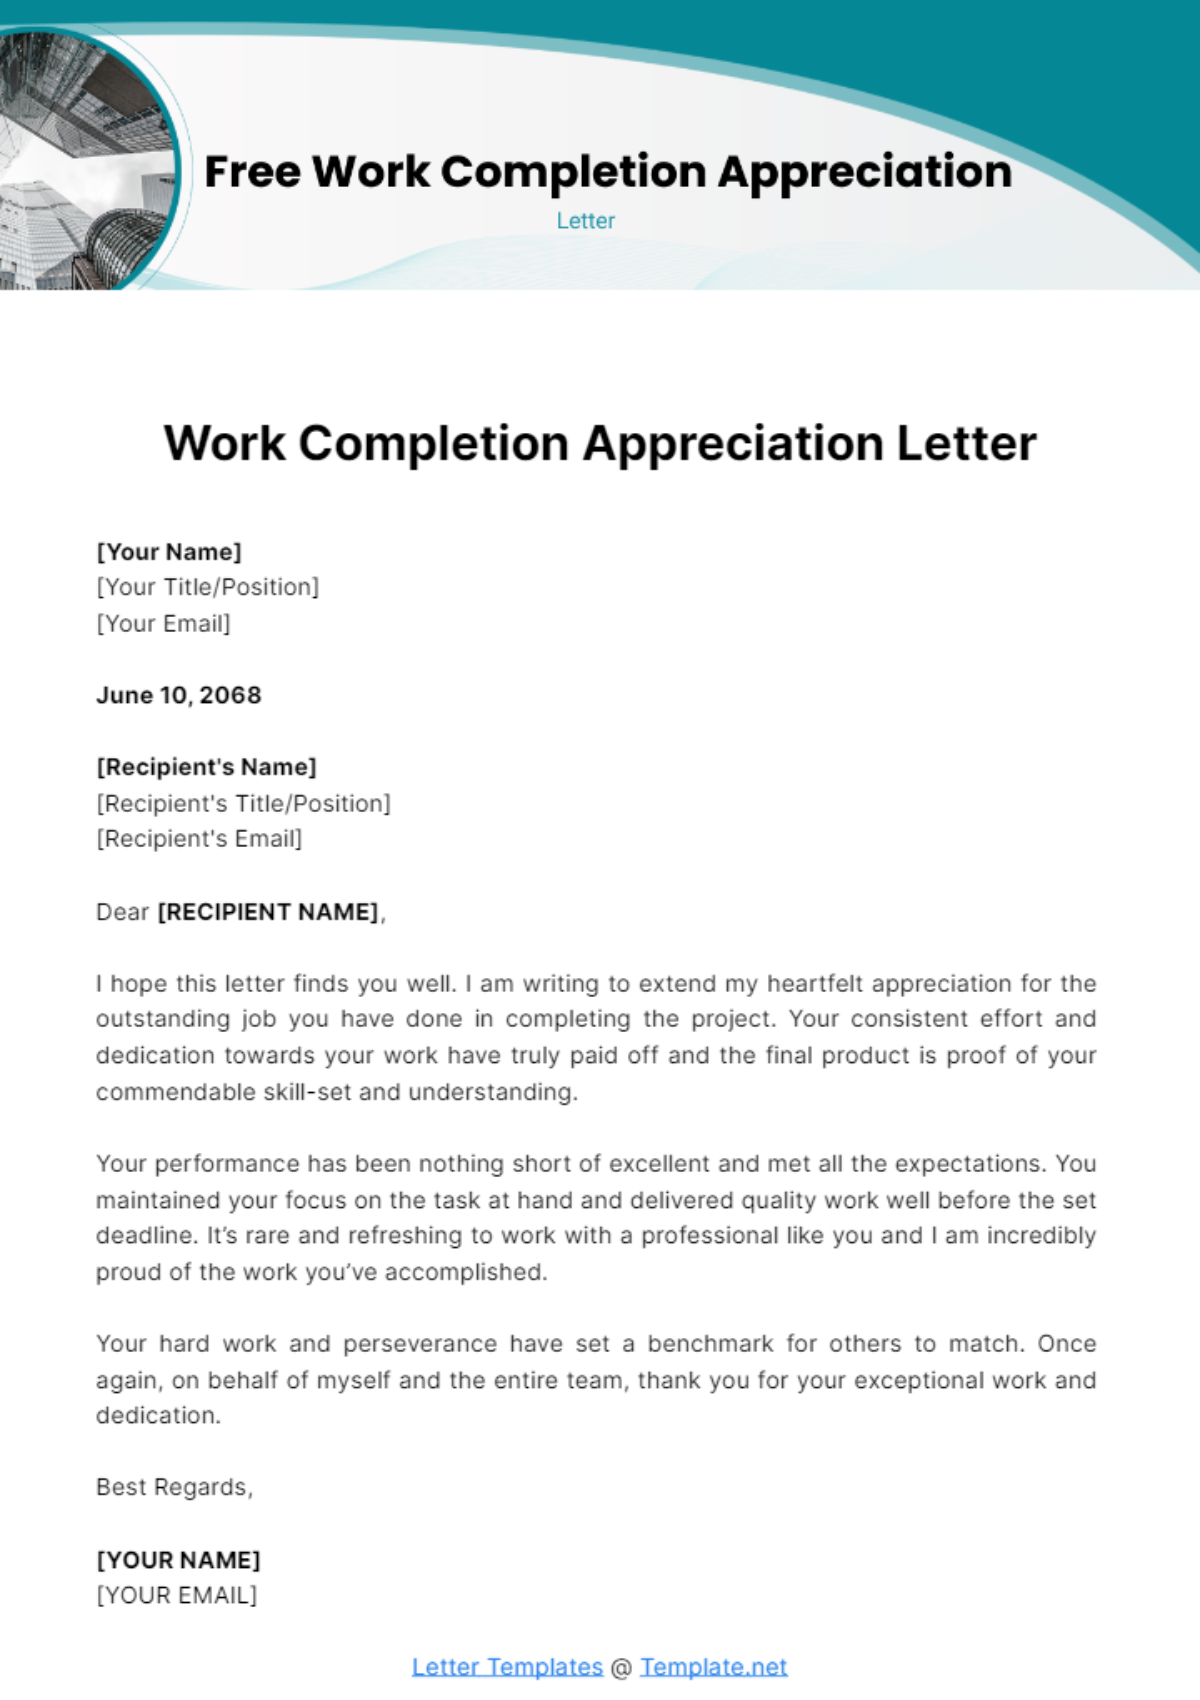 Work Completion Appreciation Letter Template